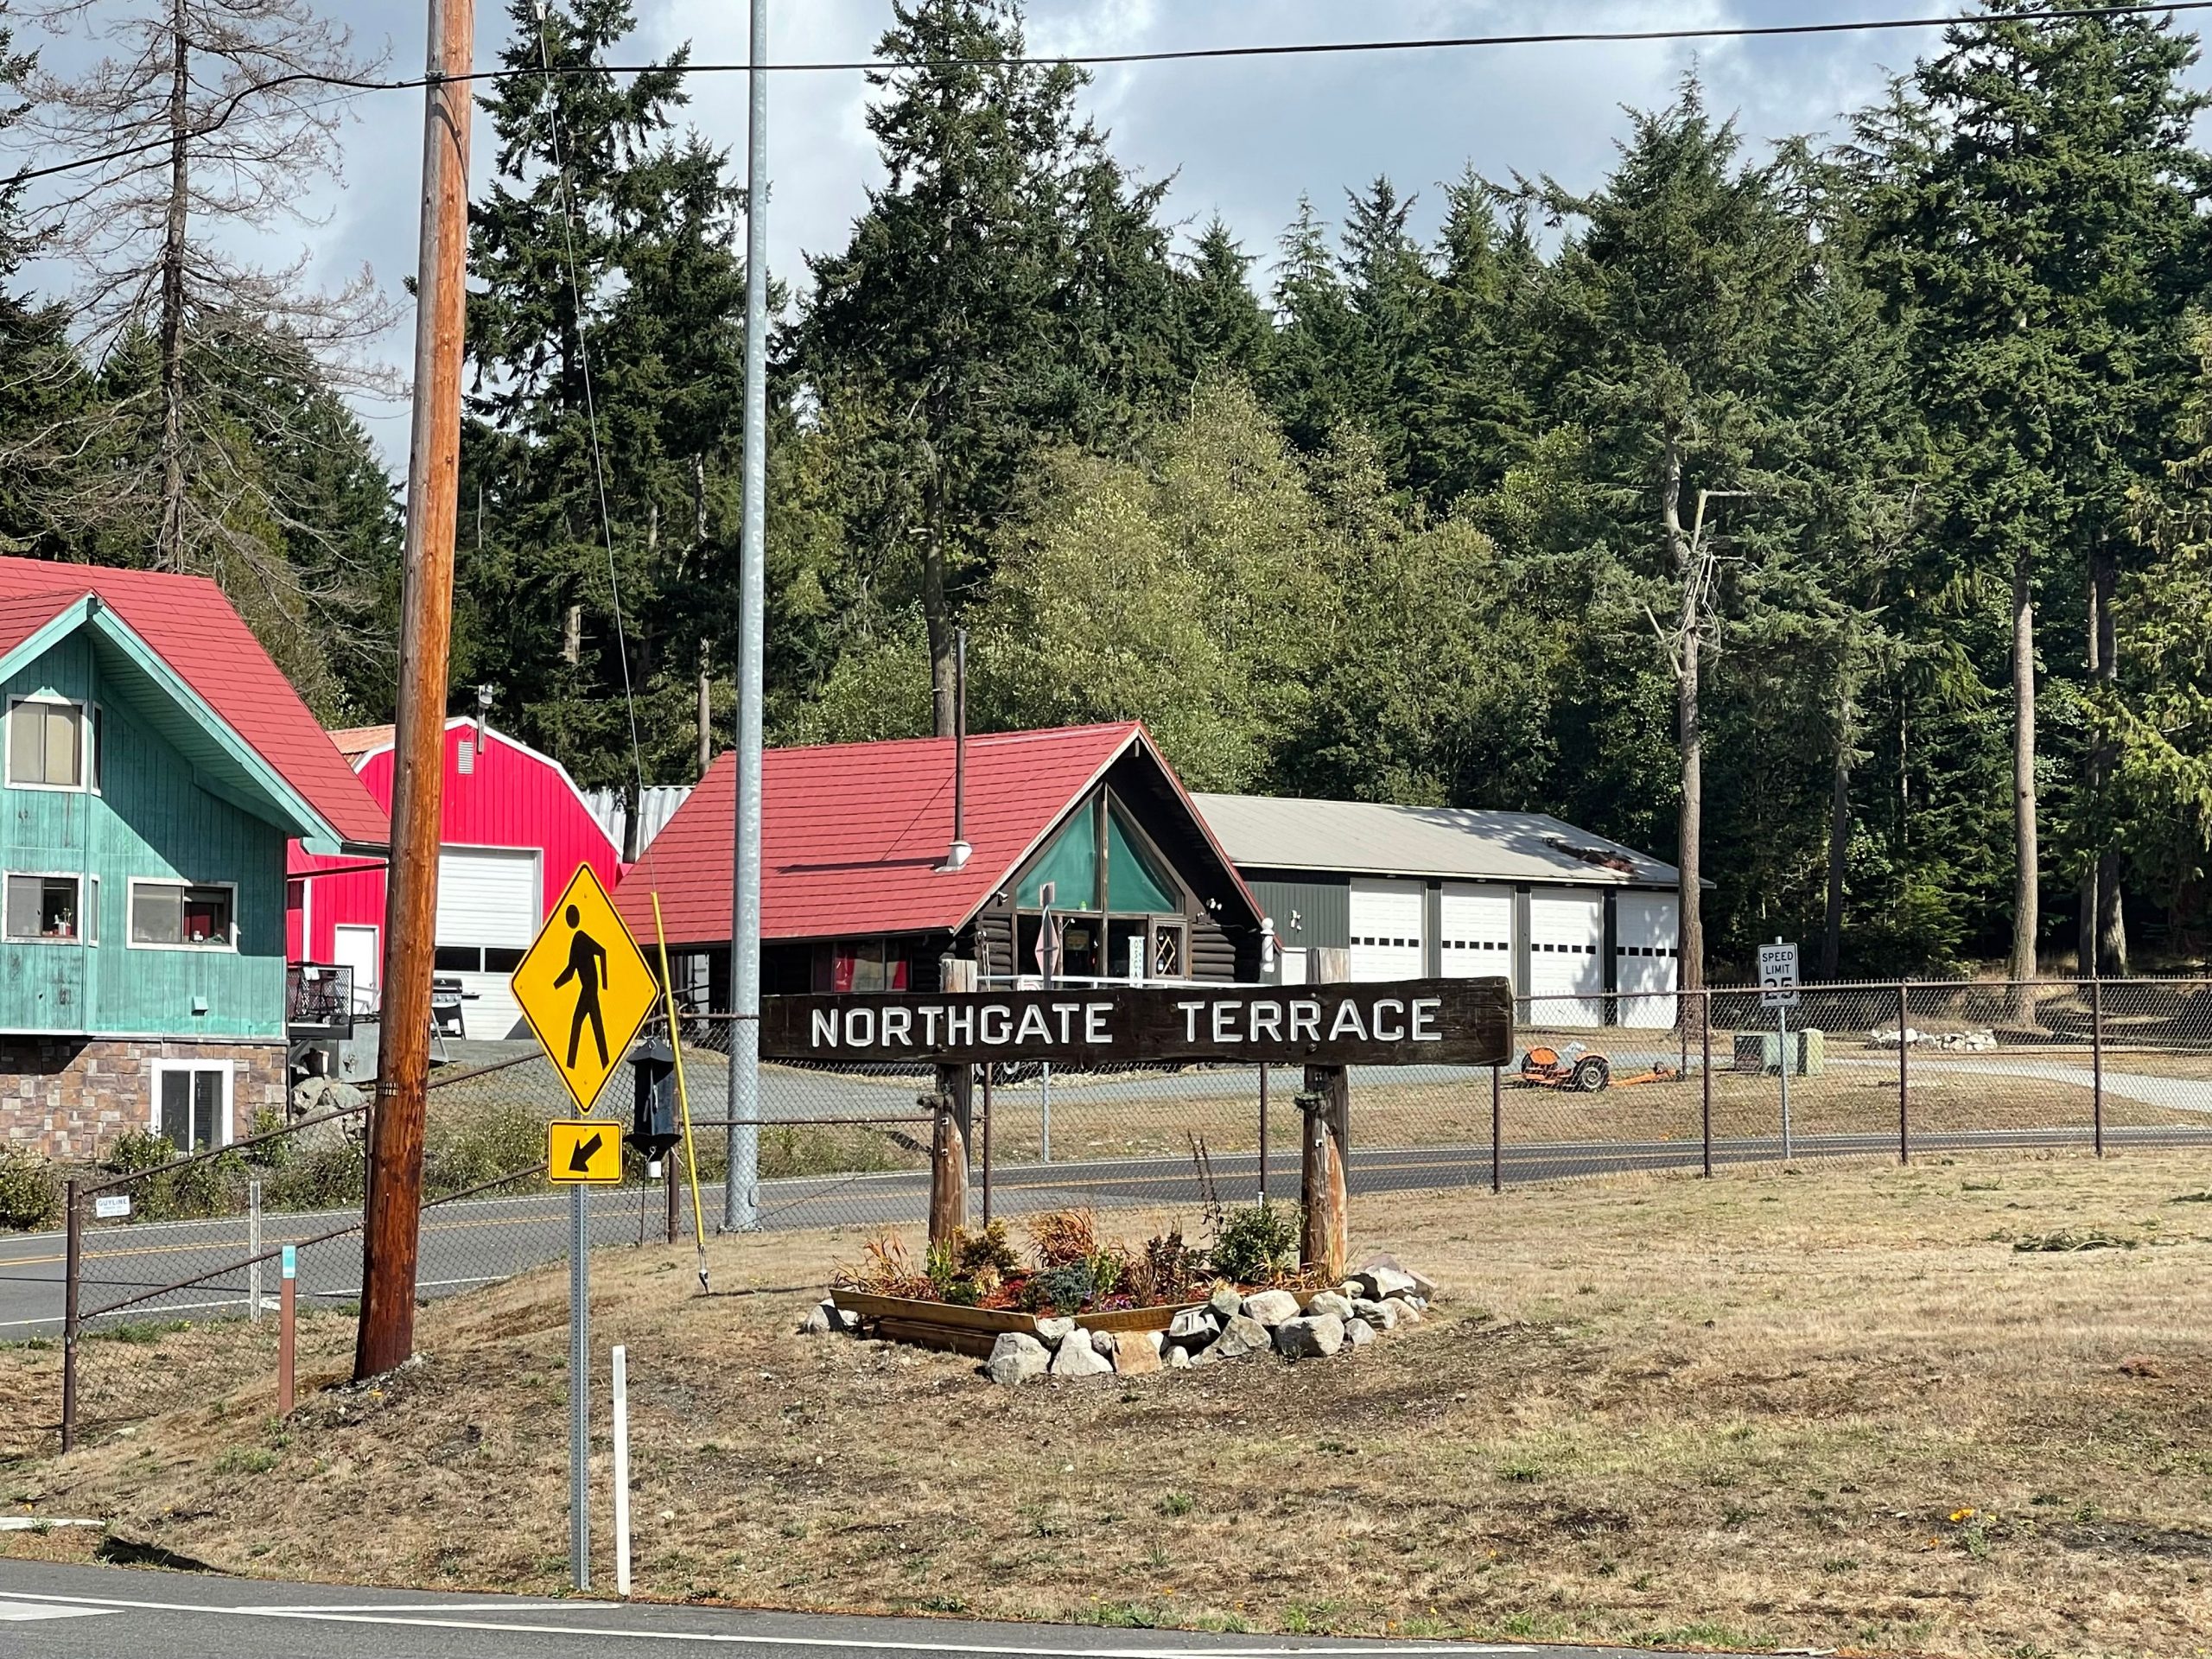 Storage Unit at entrance of Northgate Terrace, North Whidbey Island, Windermere Real Estate